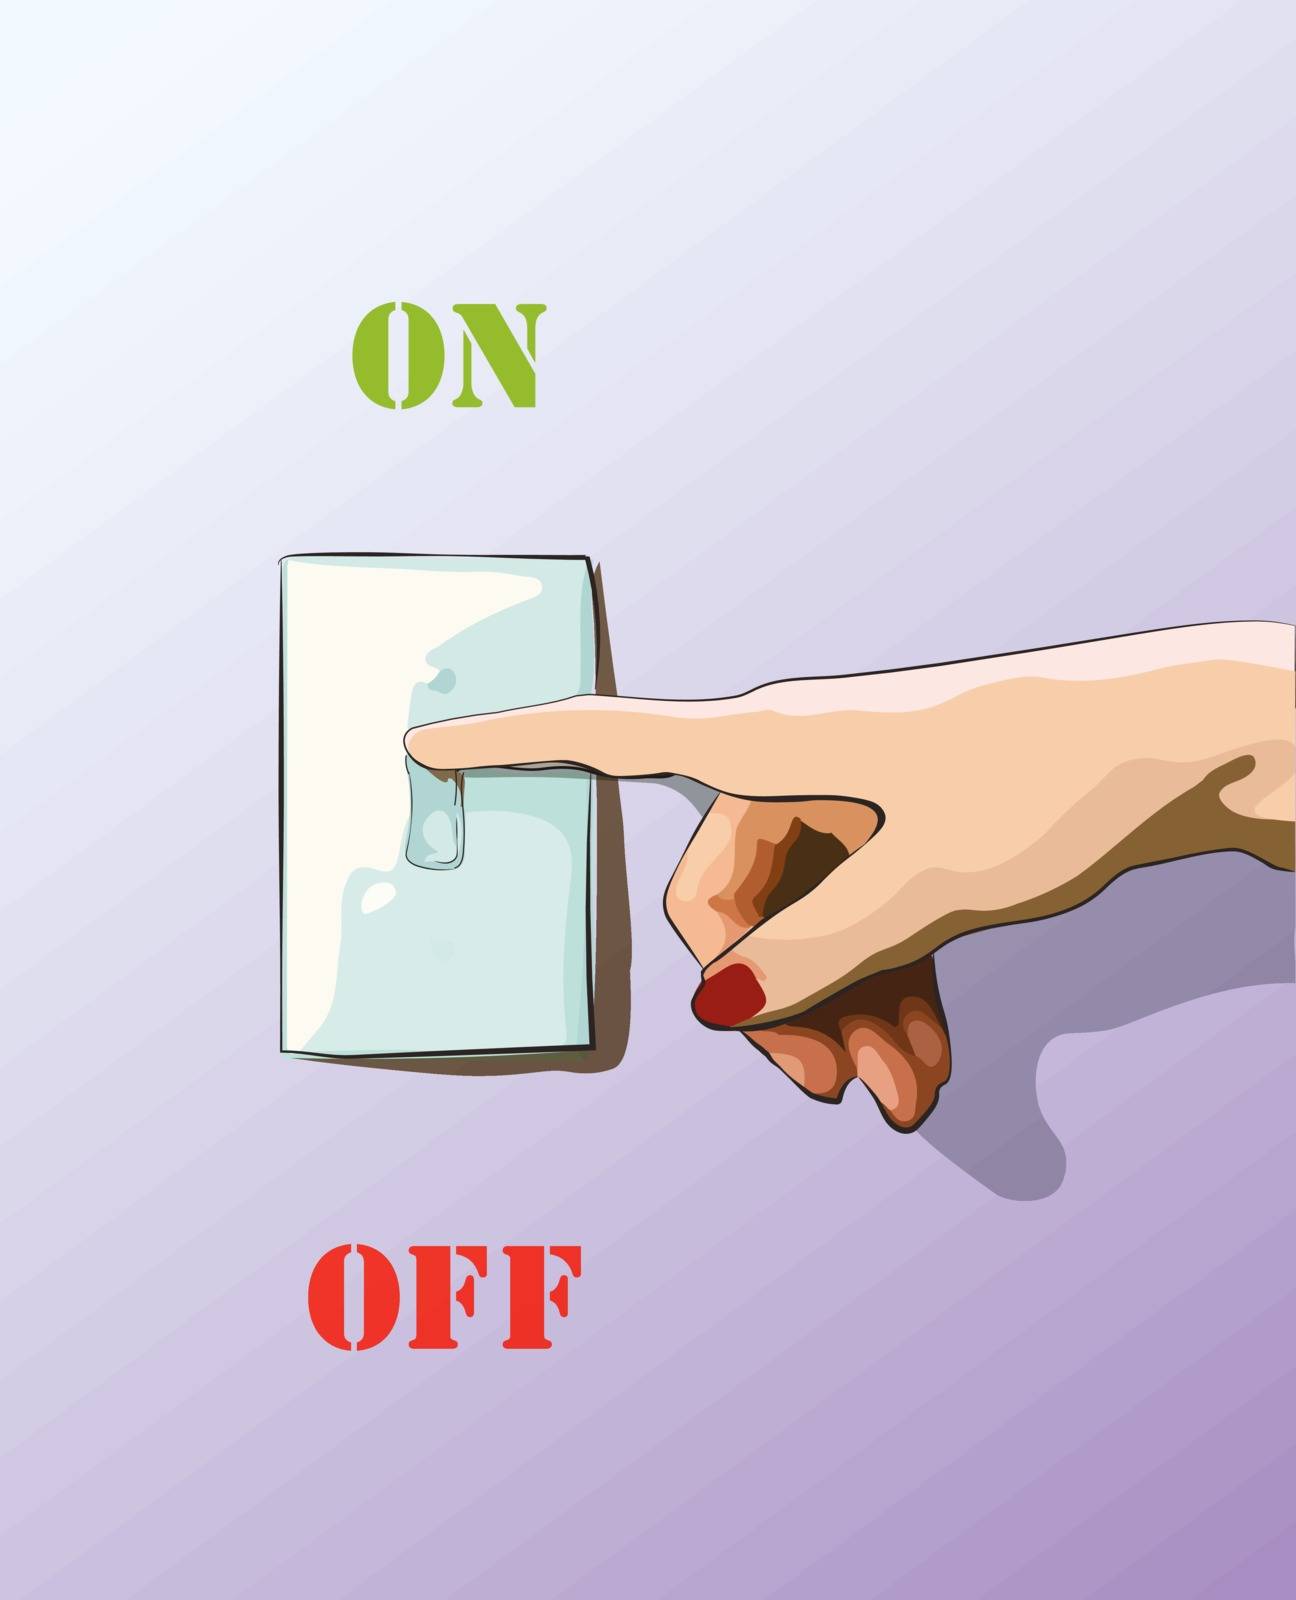 Turn off toggle style electric light wall switch. Conserve energy. Vector by Adamchuk